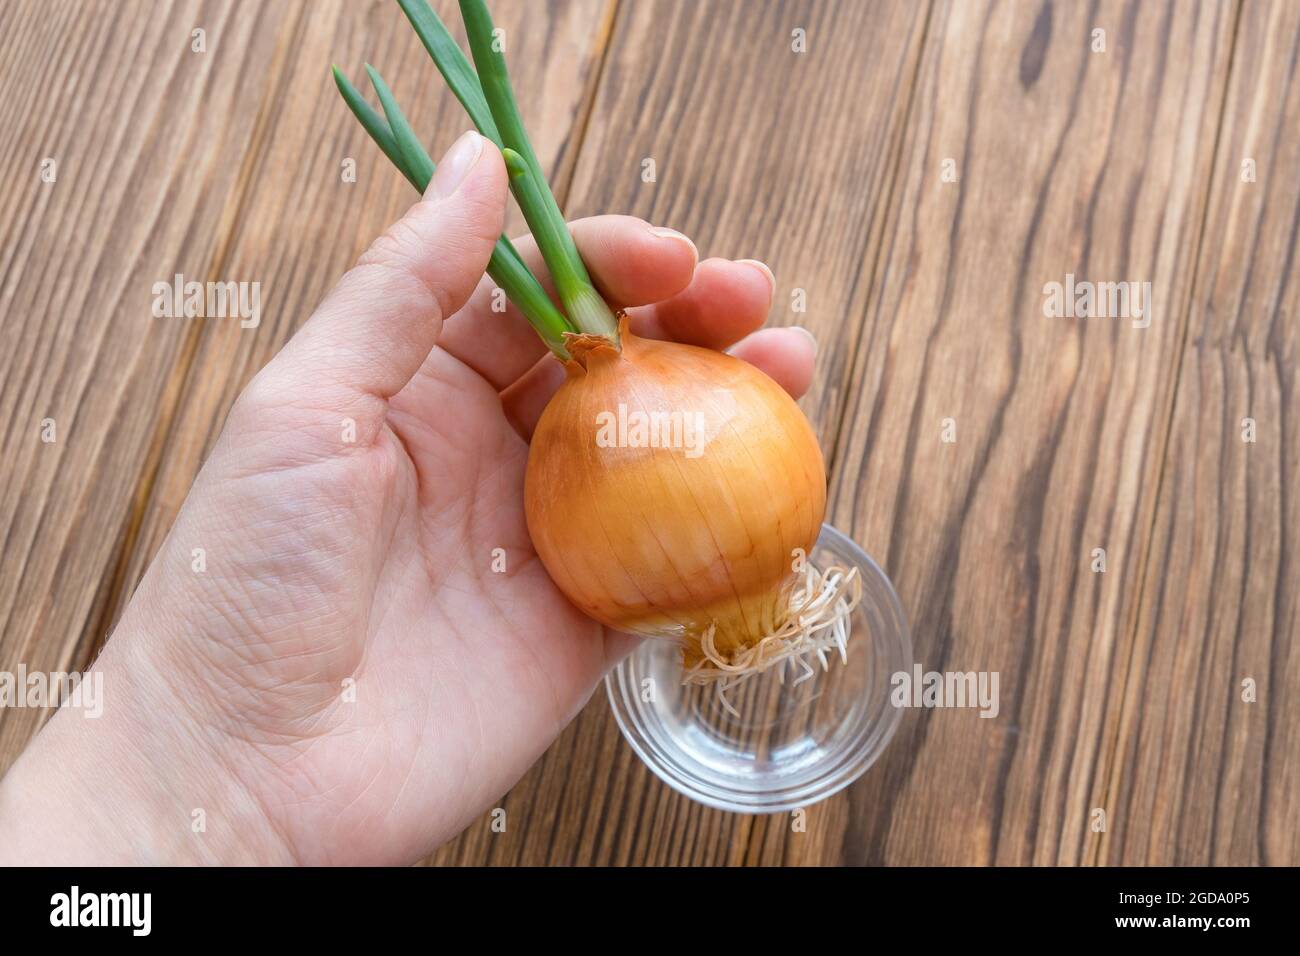 Onion head in hands. Onion sprouted, roots and green stems are visible. Stock Photo